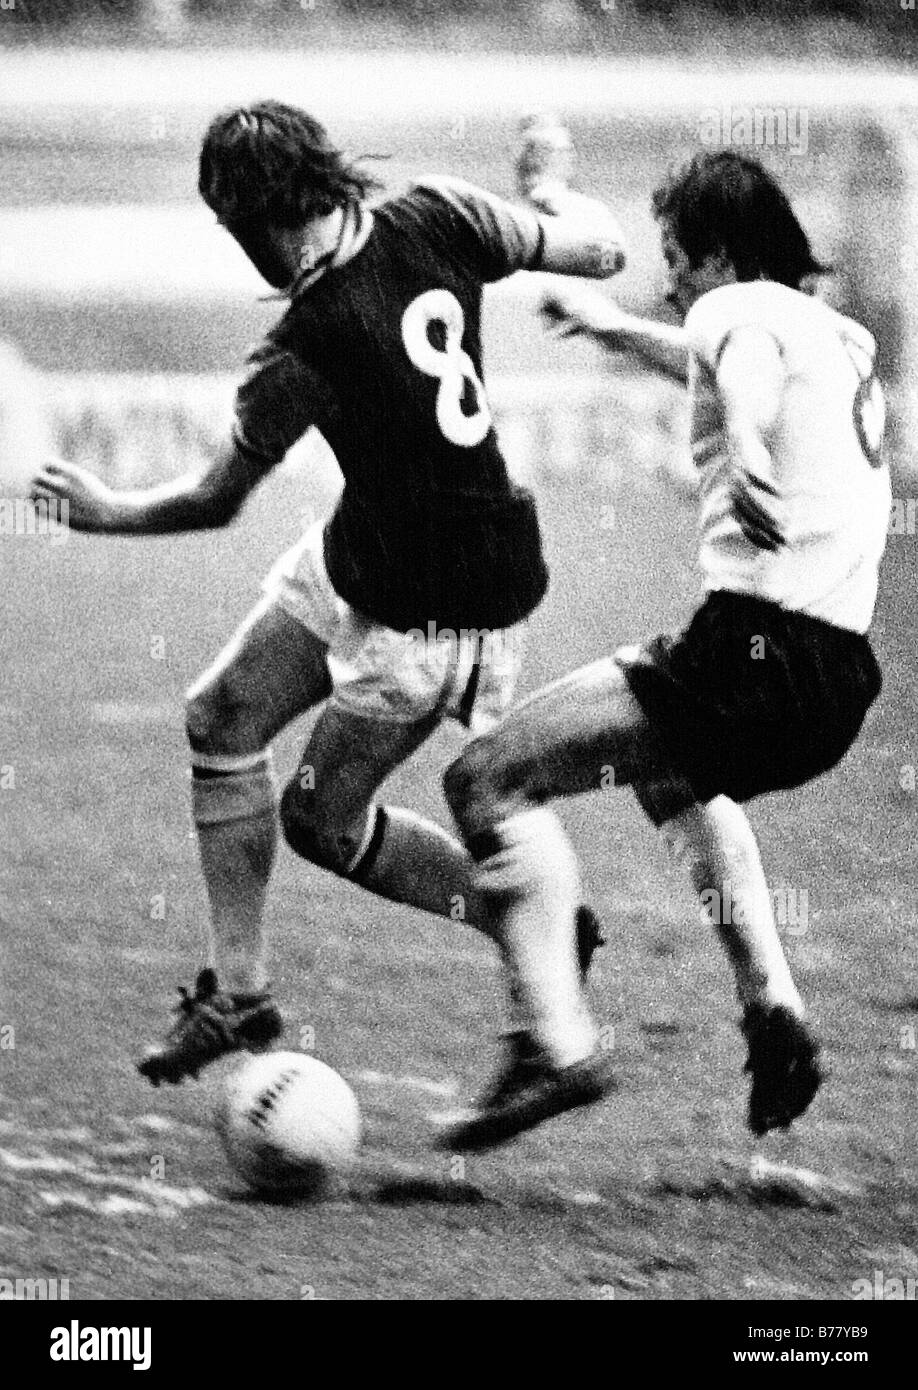 Brian Little of Aston Villa Football Clubs is tackled by Jimmy Case of Liverpool FC in a First Division game at Villa Park. Stock Photo